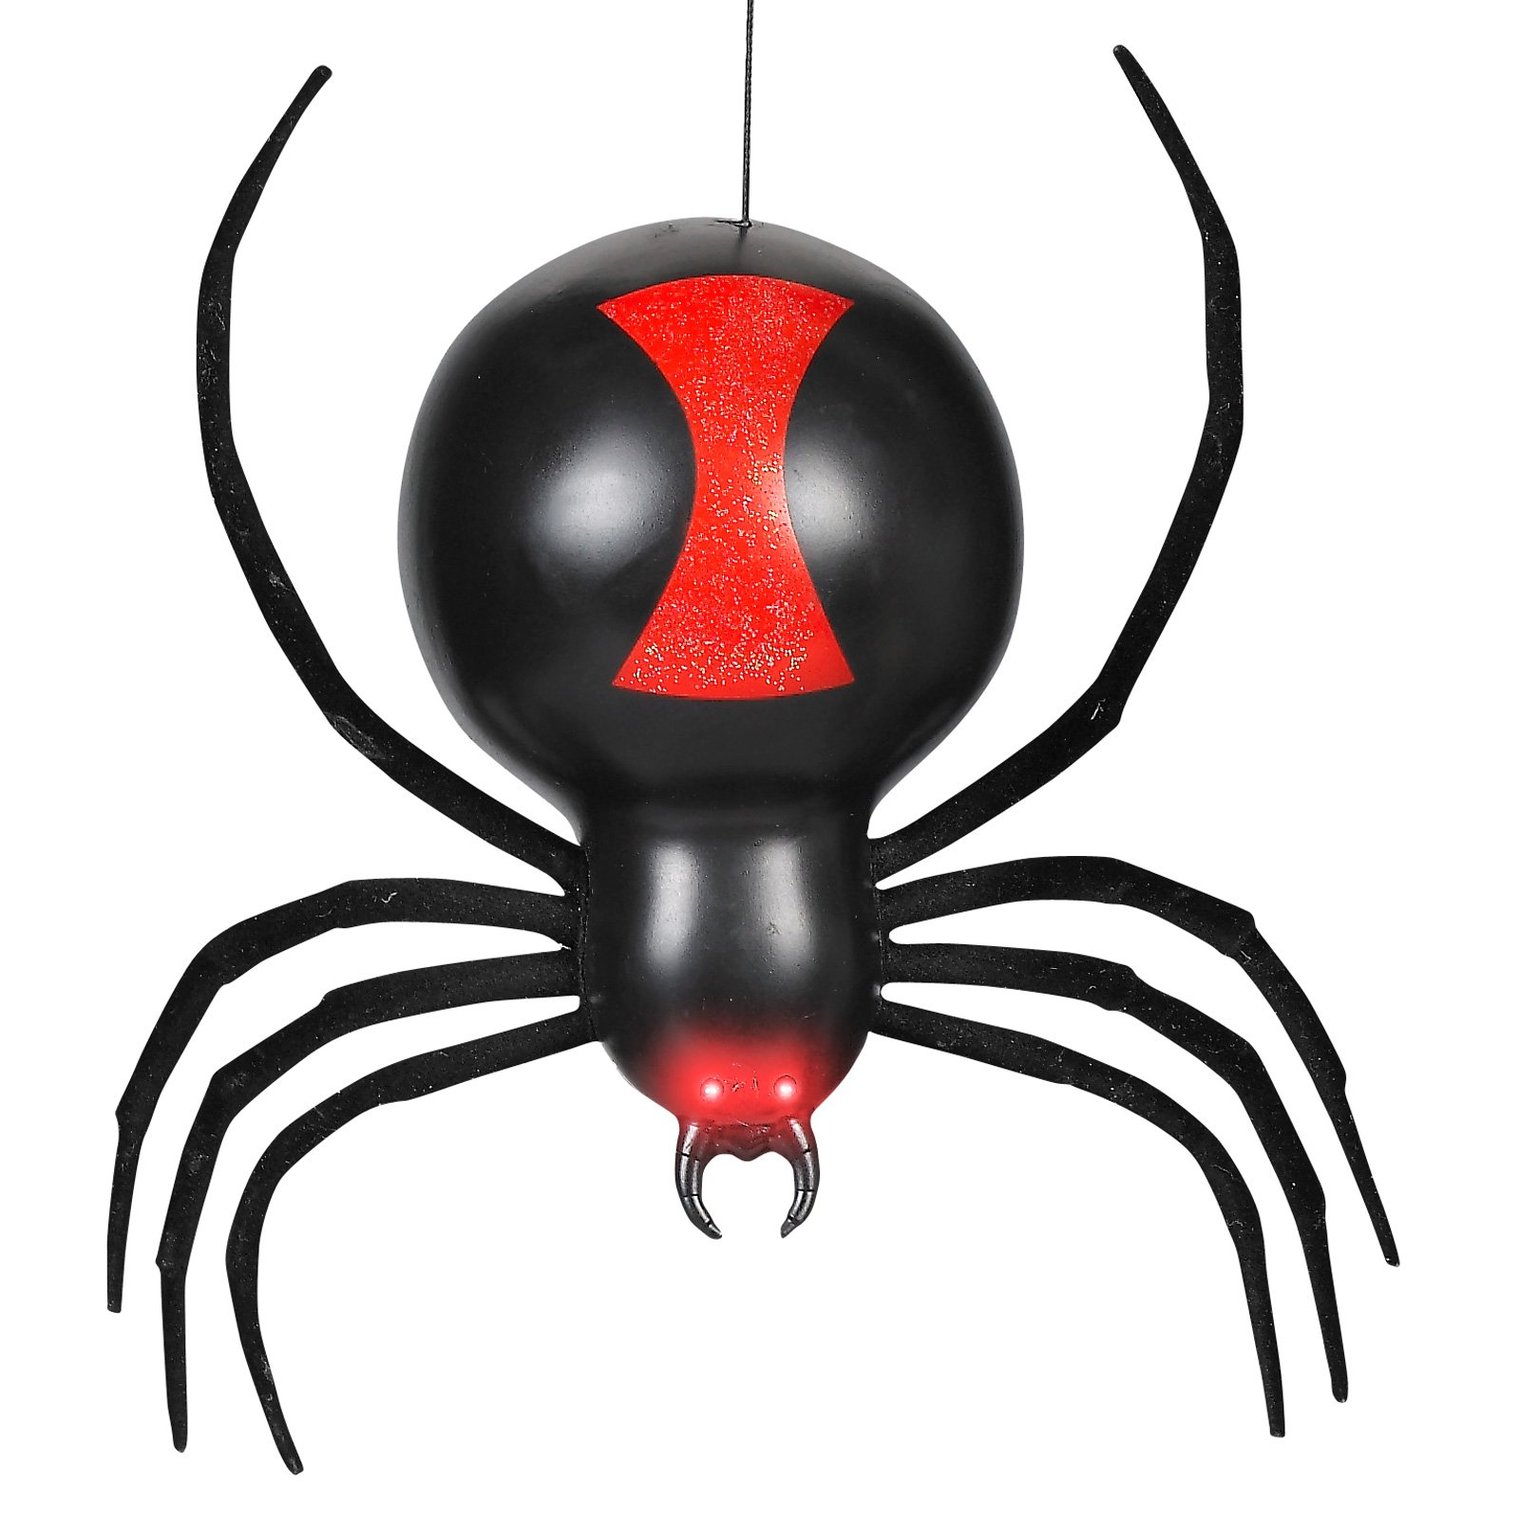 Animated Spider Pictures Clipart - Free to use Clip Art Resource